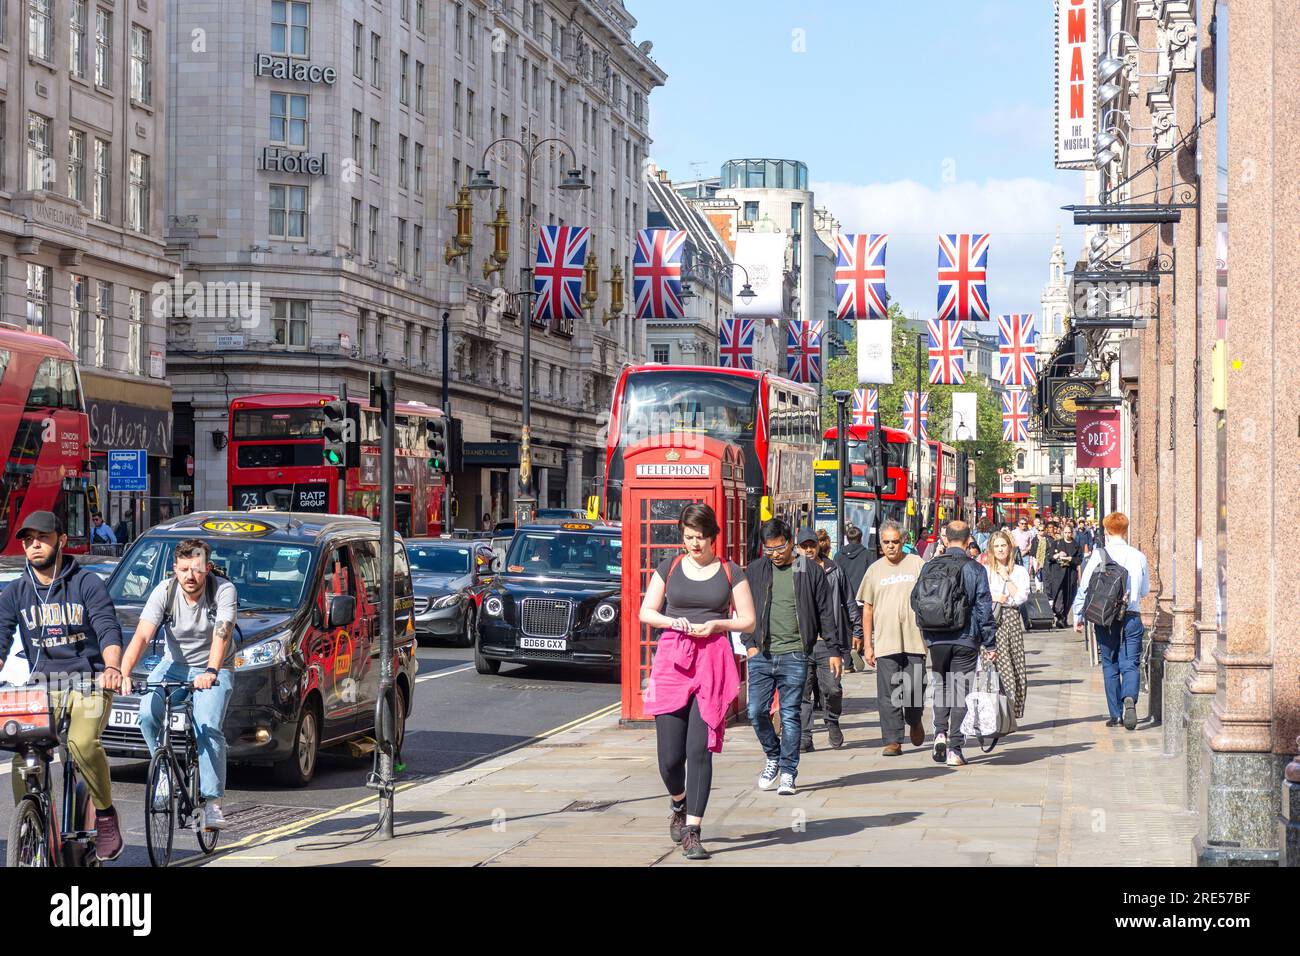 Traffic and pedestrians on The Strand, City of Westminster, Greater London, England, United Kingdom Stock Photo